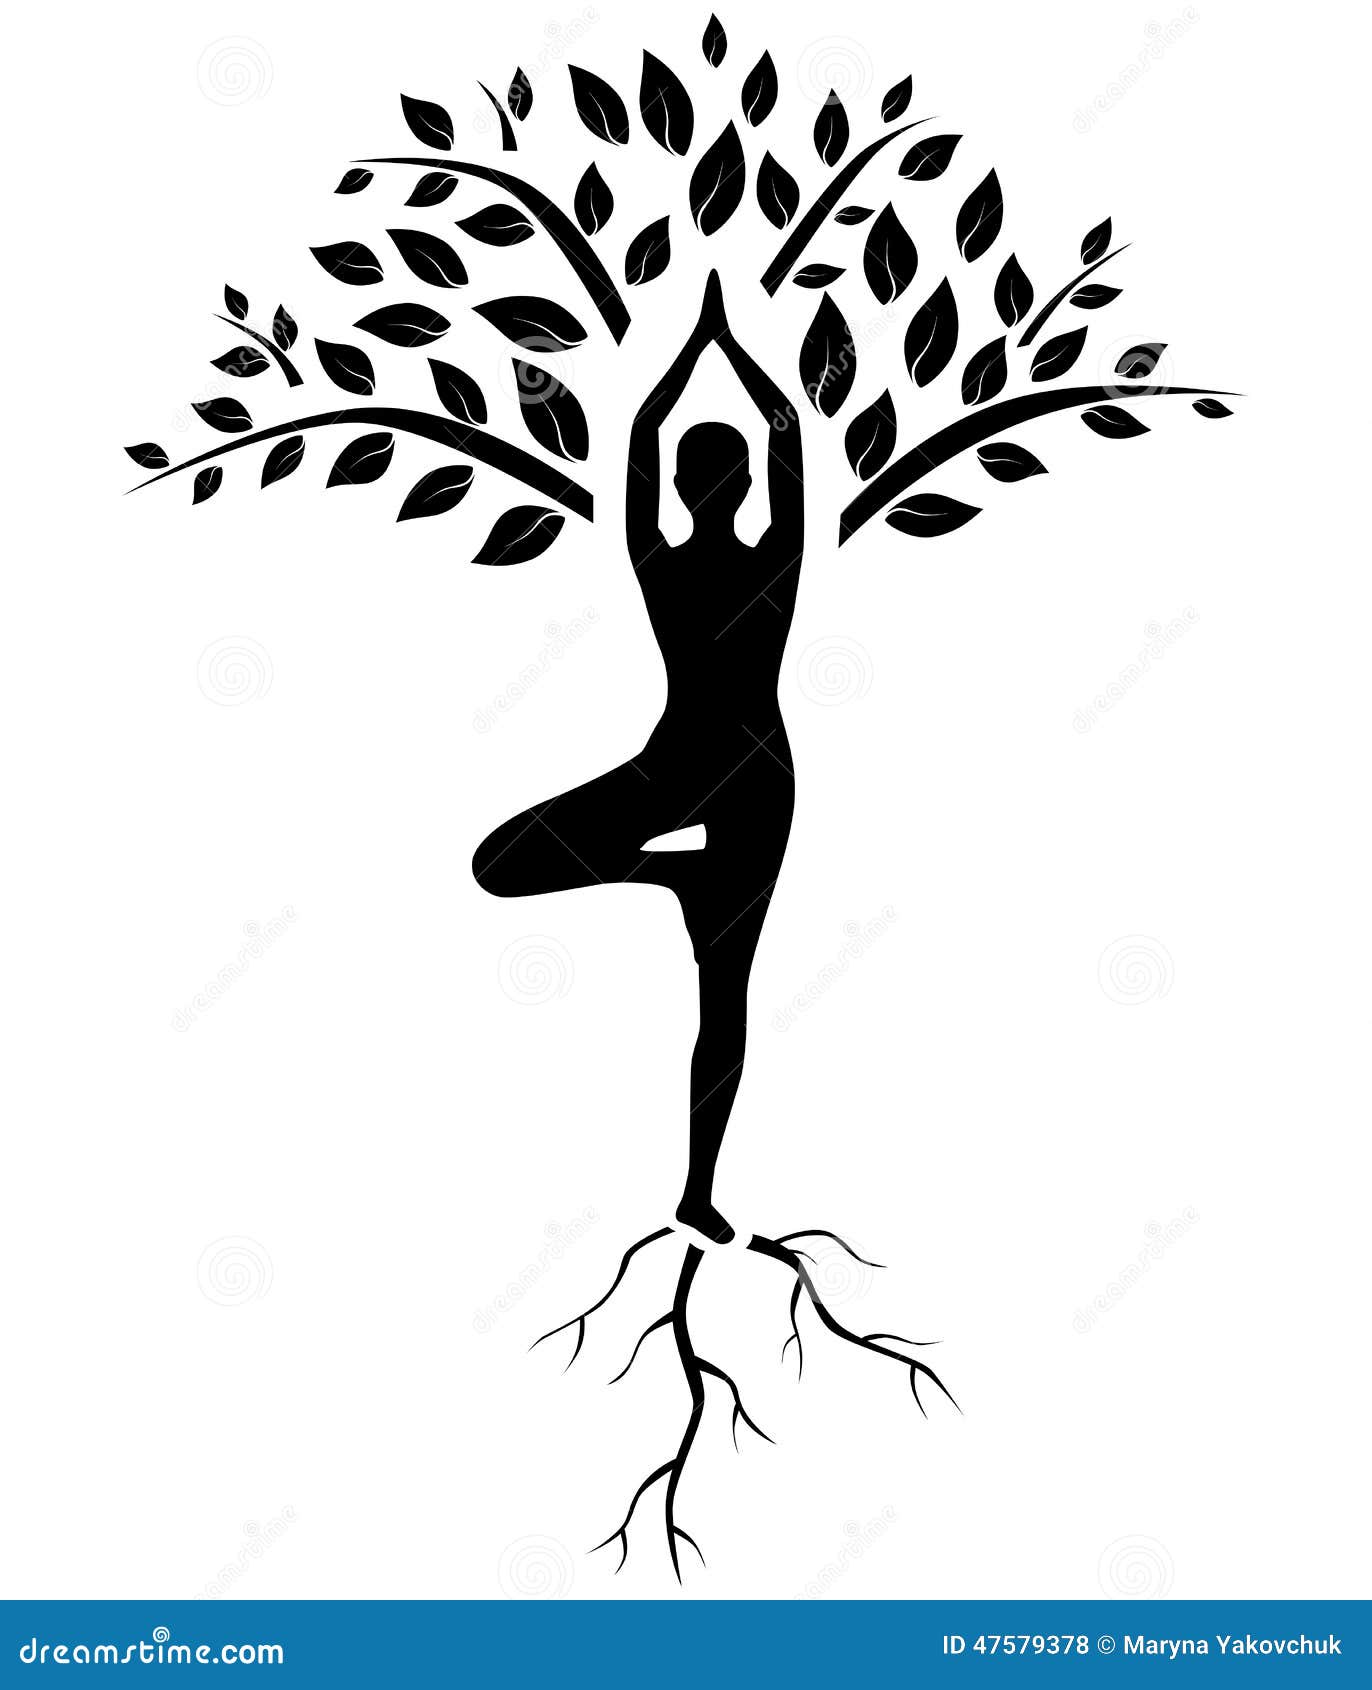 clipart of yoga poses - photo #45